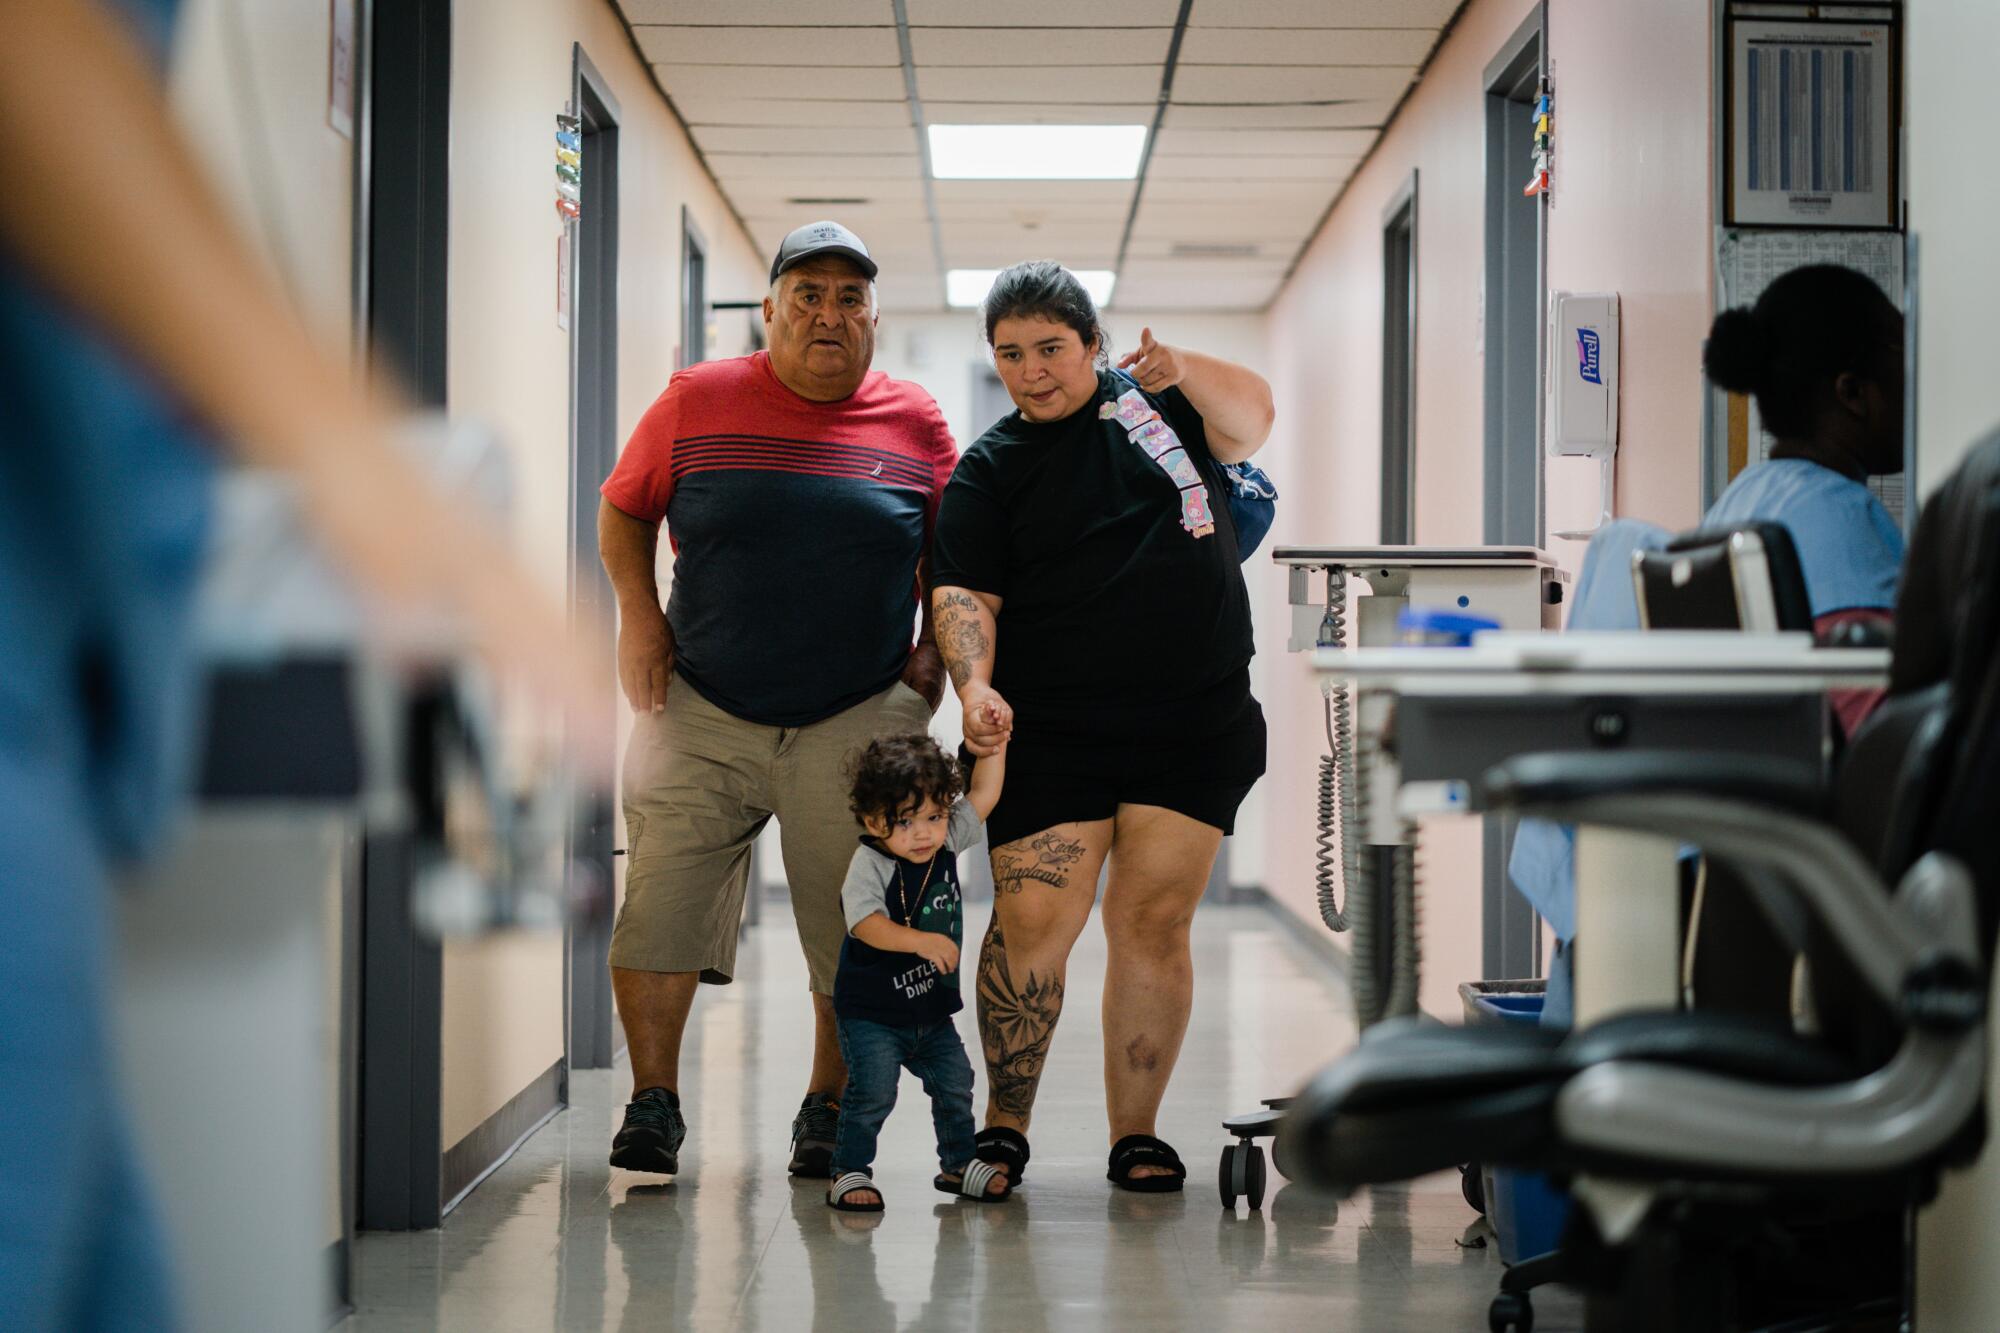 An older man and a young woman leading a toddler walk together down a hospital hallway. 